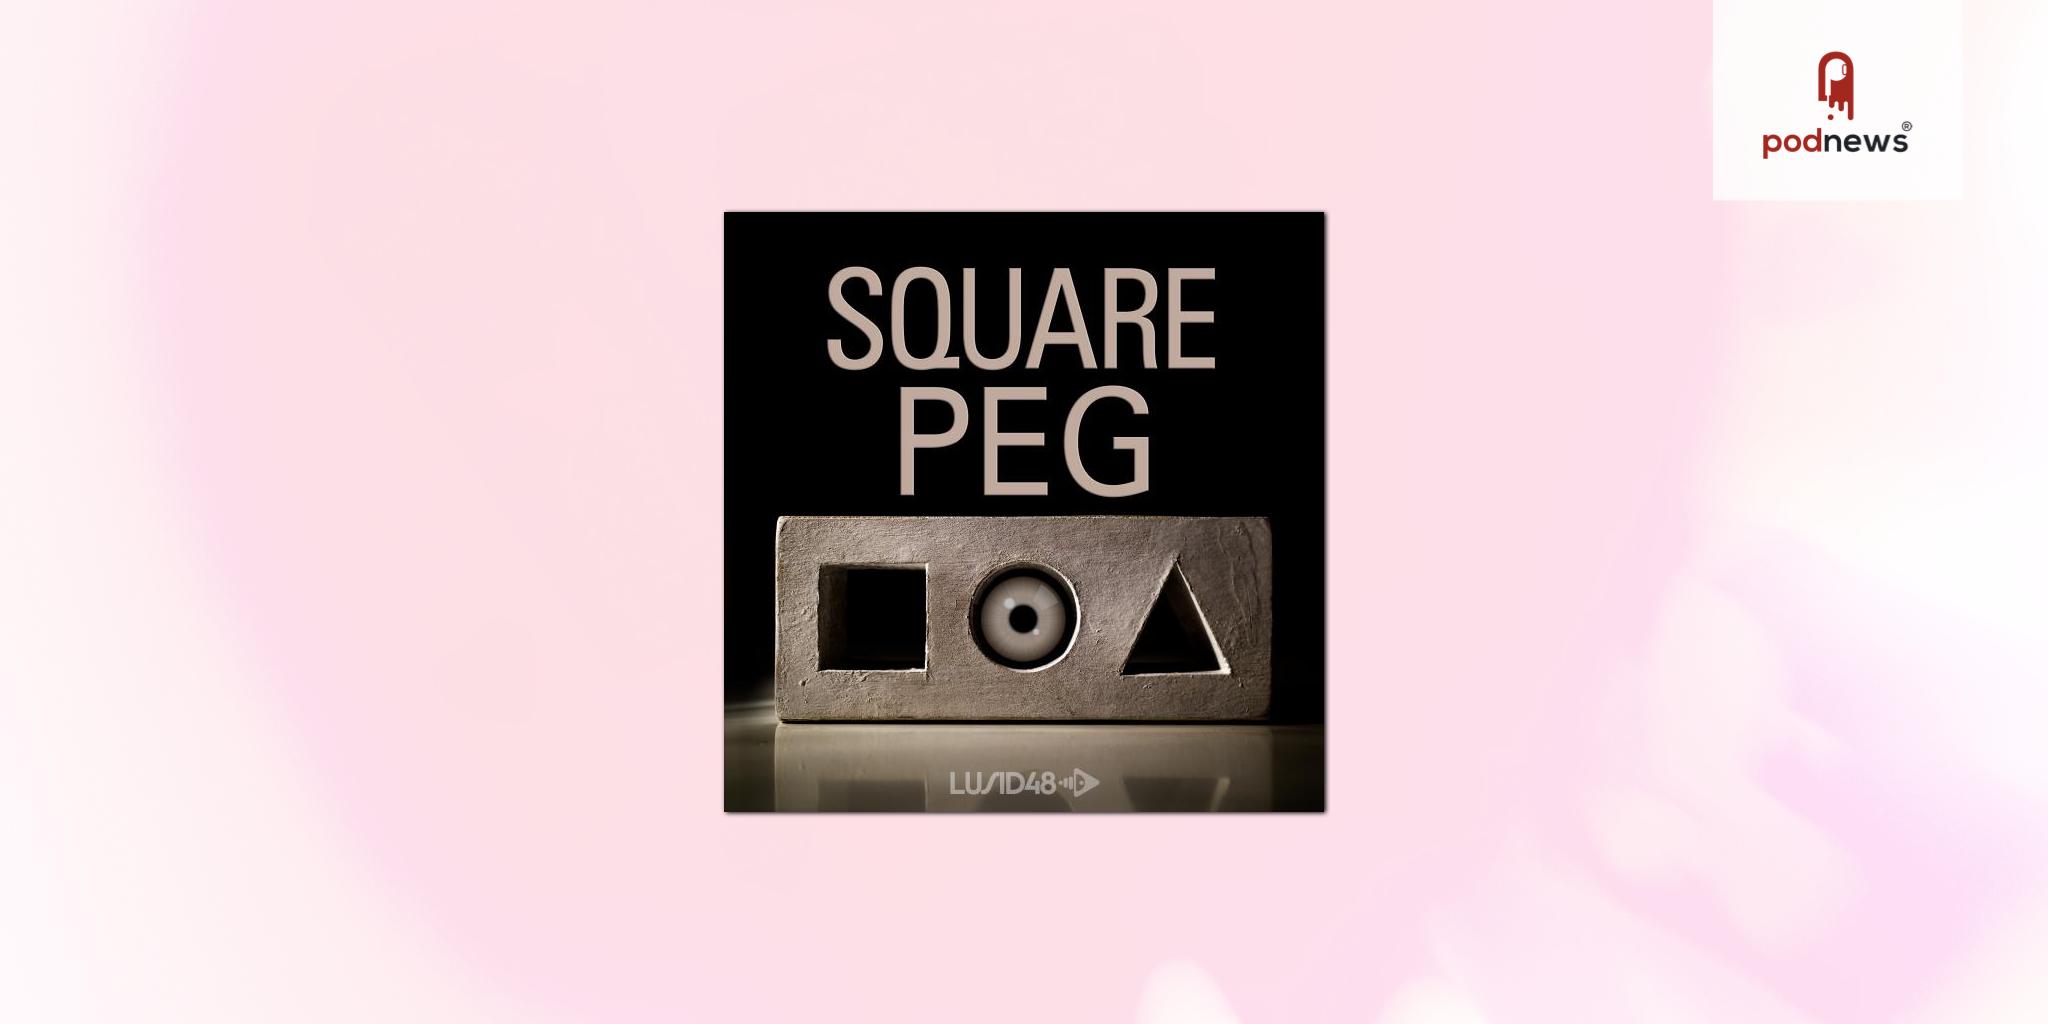 Square Peg - An Extraordinary True Story of Persistence and Human Connection